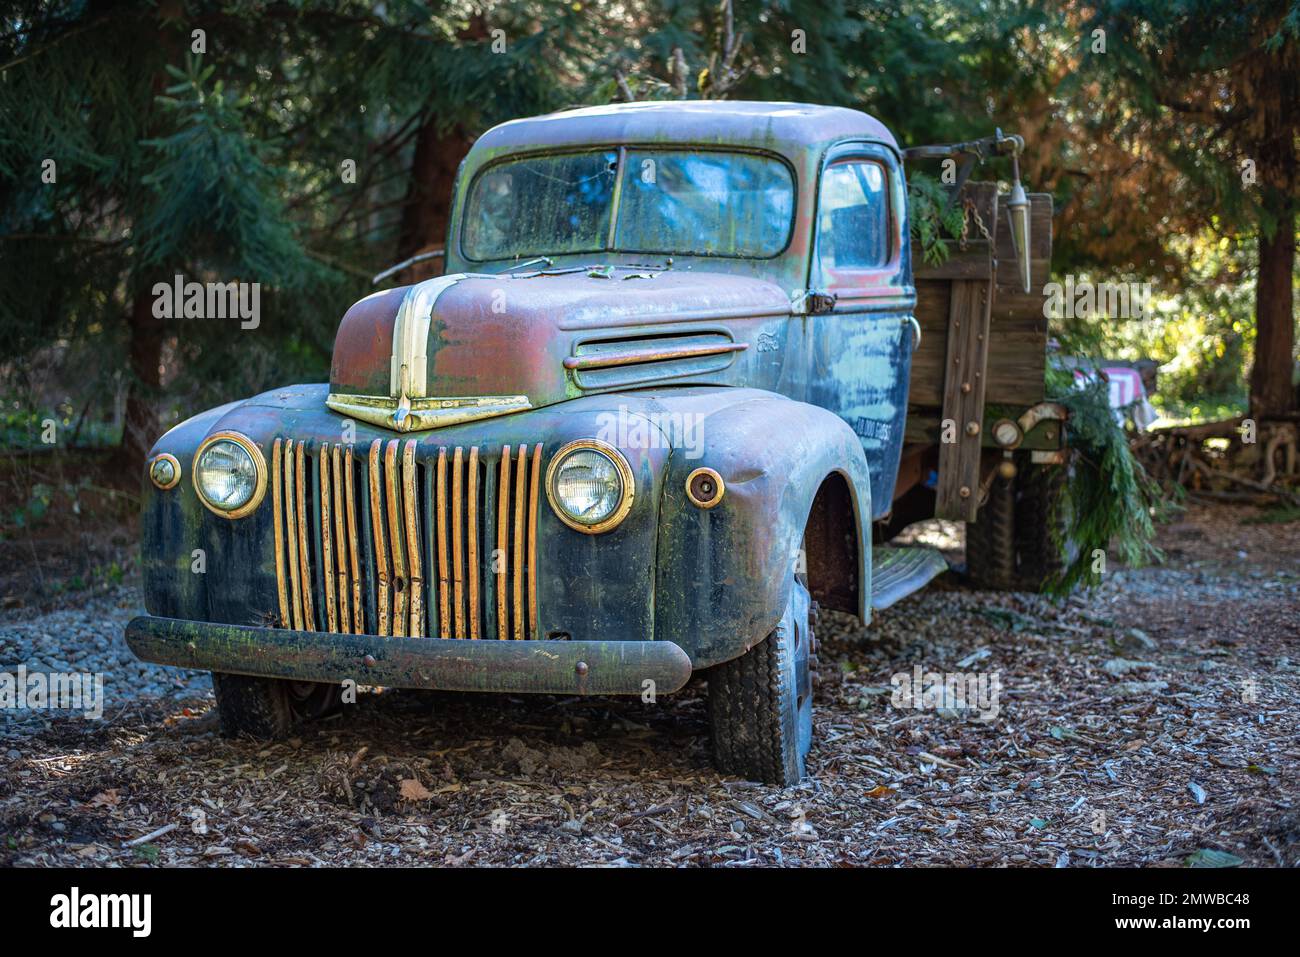 An old vintage Ford truck in the countryside with pine trees in the background Stock Photo